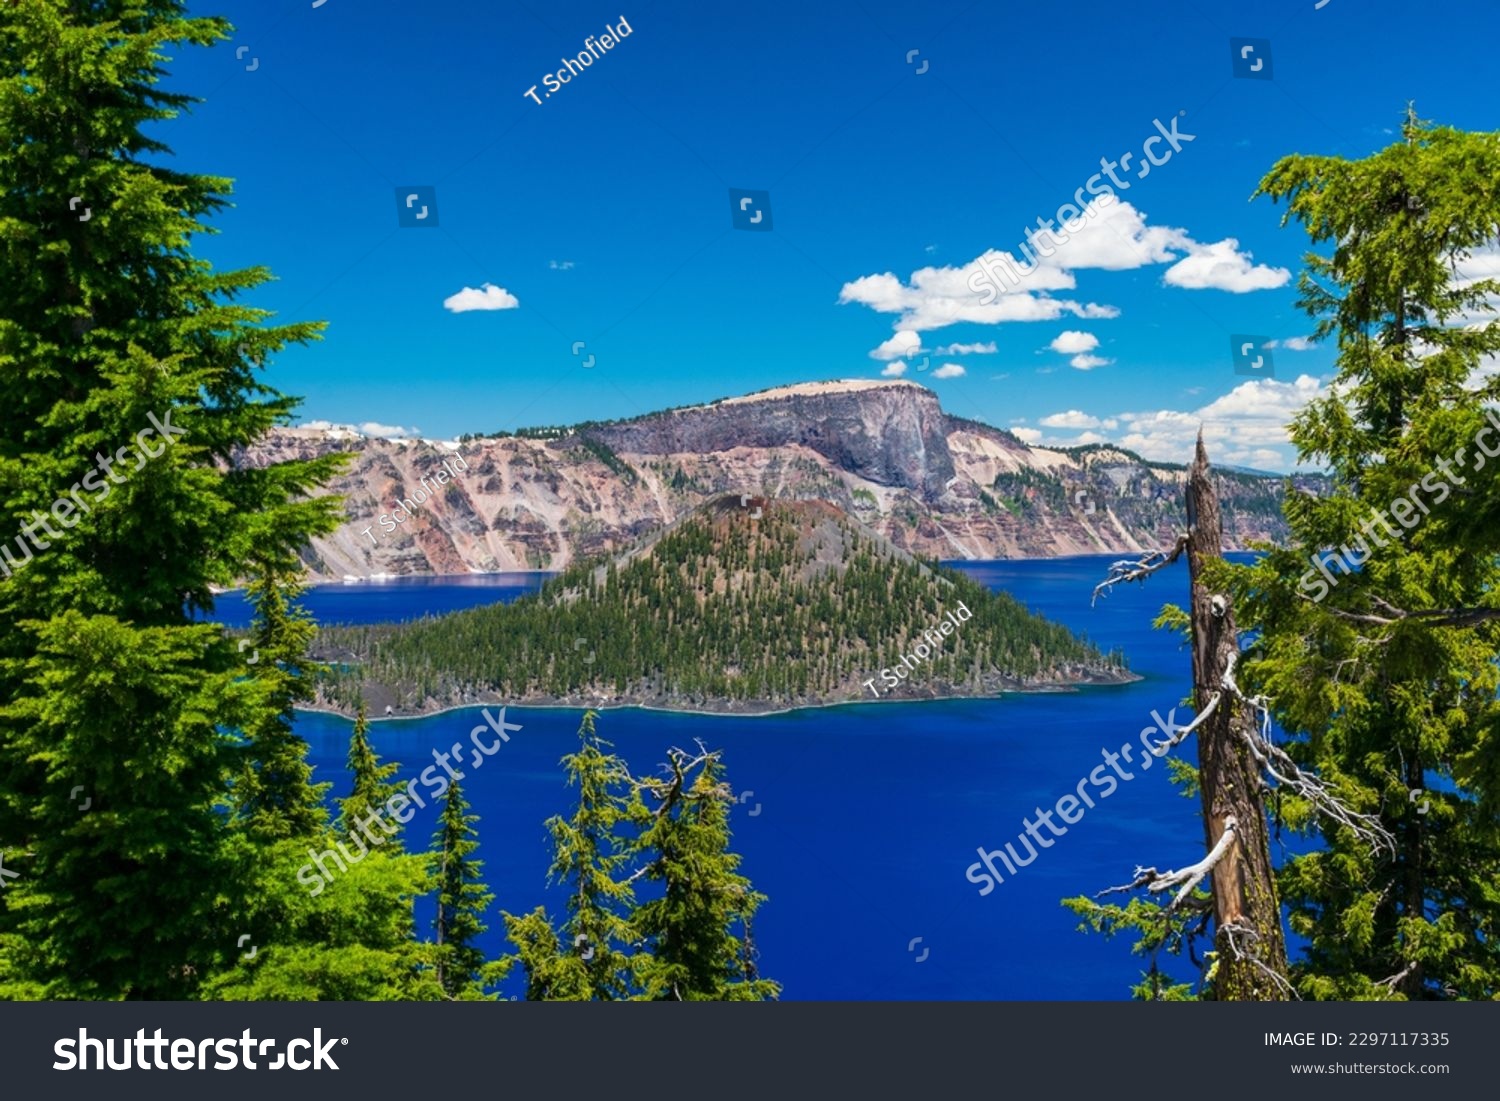 Beautiful Crater Lake National Park with late season snow still lingering into early summer. Bright blue lake with reflections #2297117335